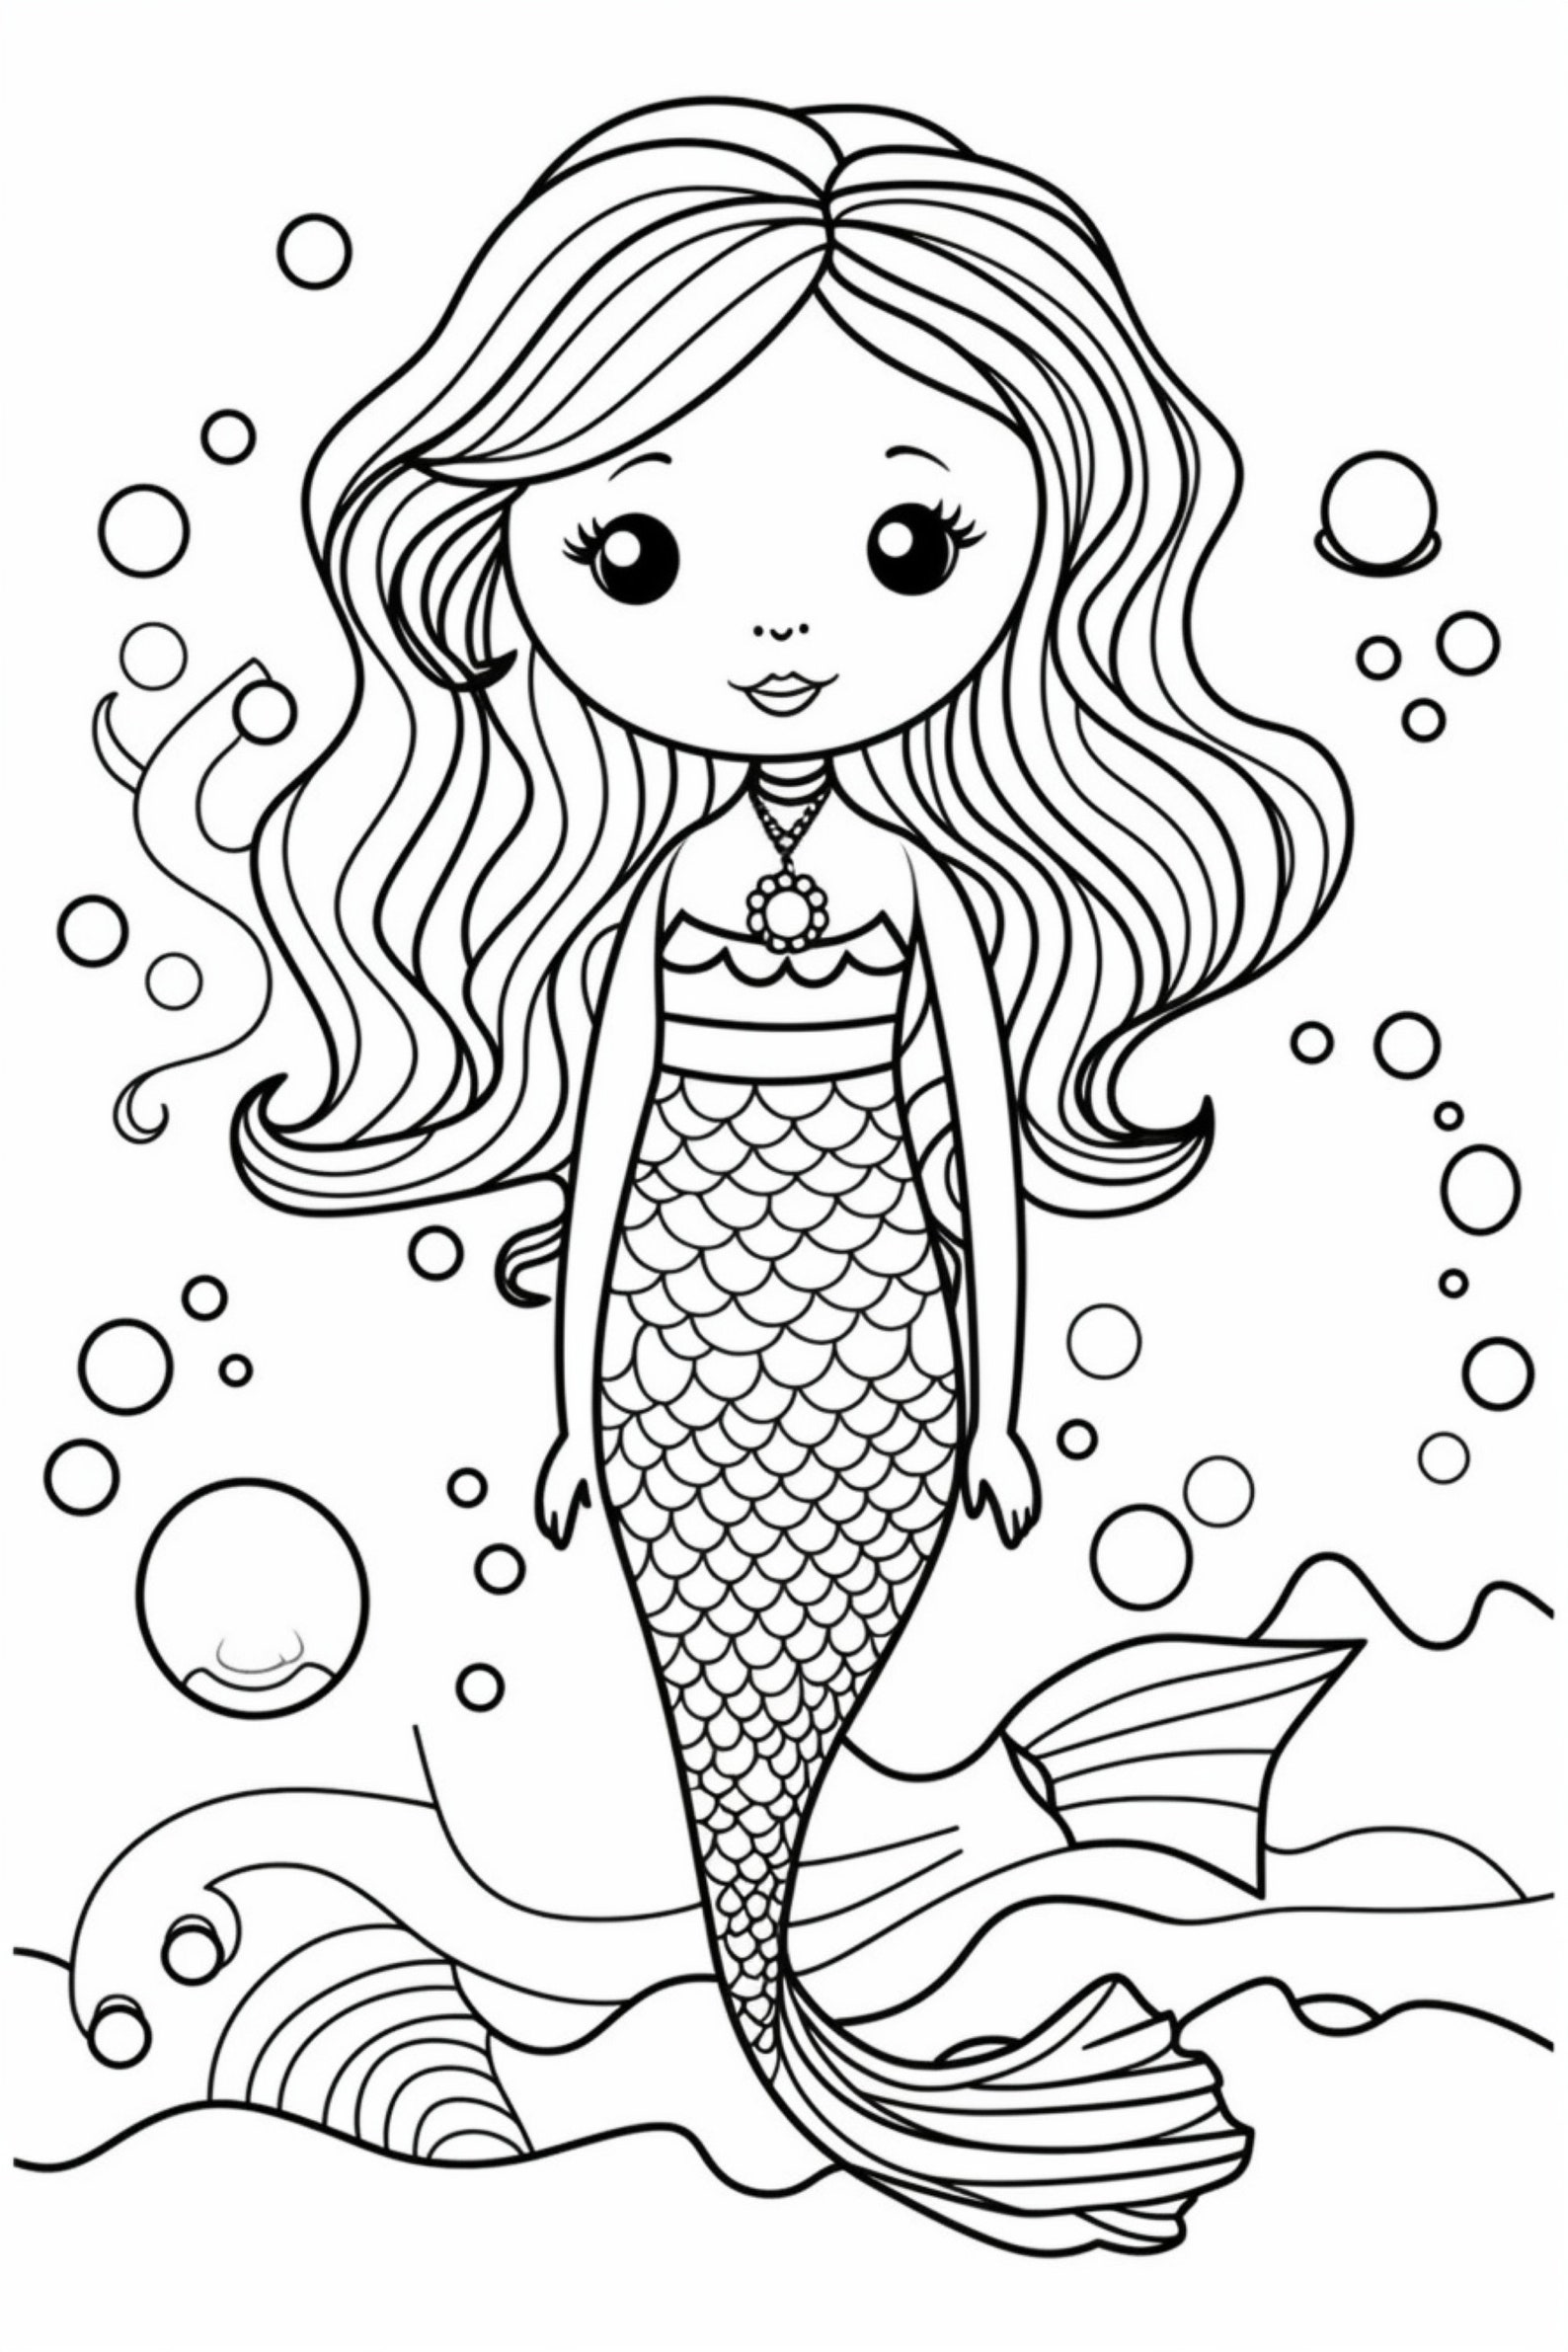 Mermaid 2 Coloring Pages 5 - Etsy